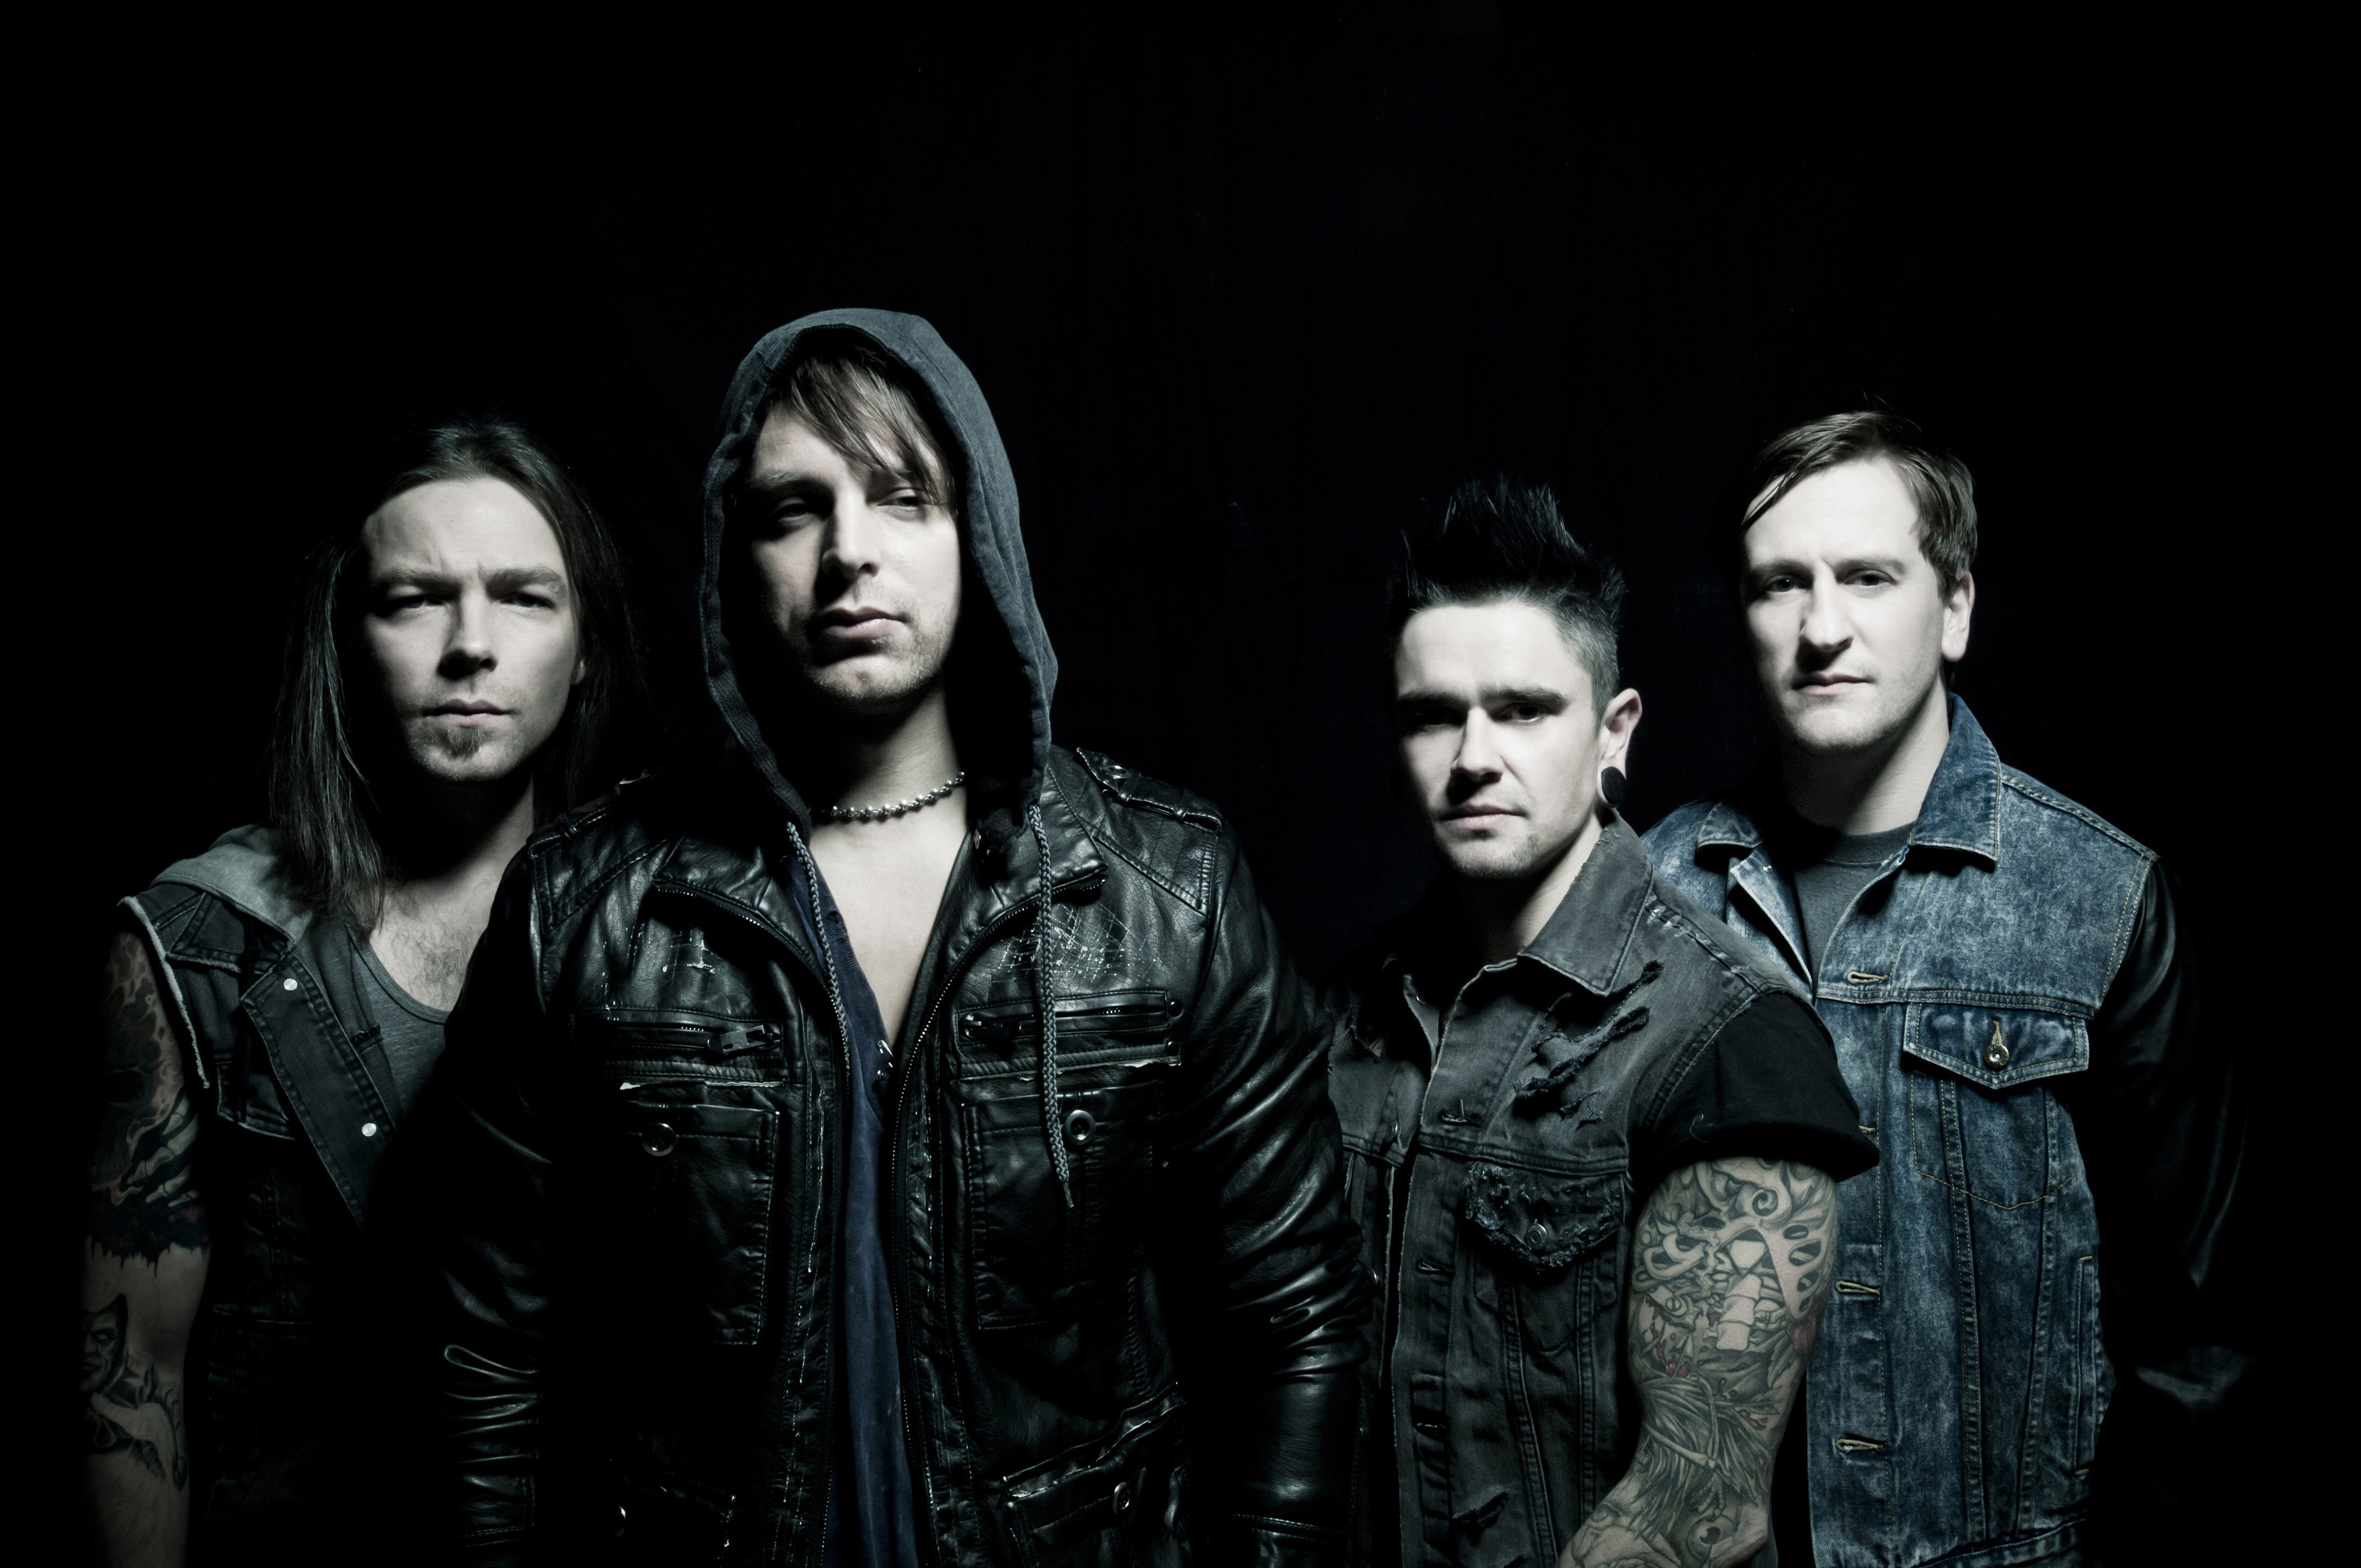 Bullet for my Valentine are to play at the O2 Academy Birmingham in March